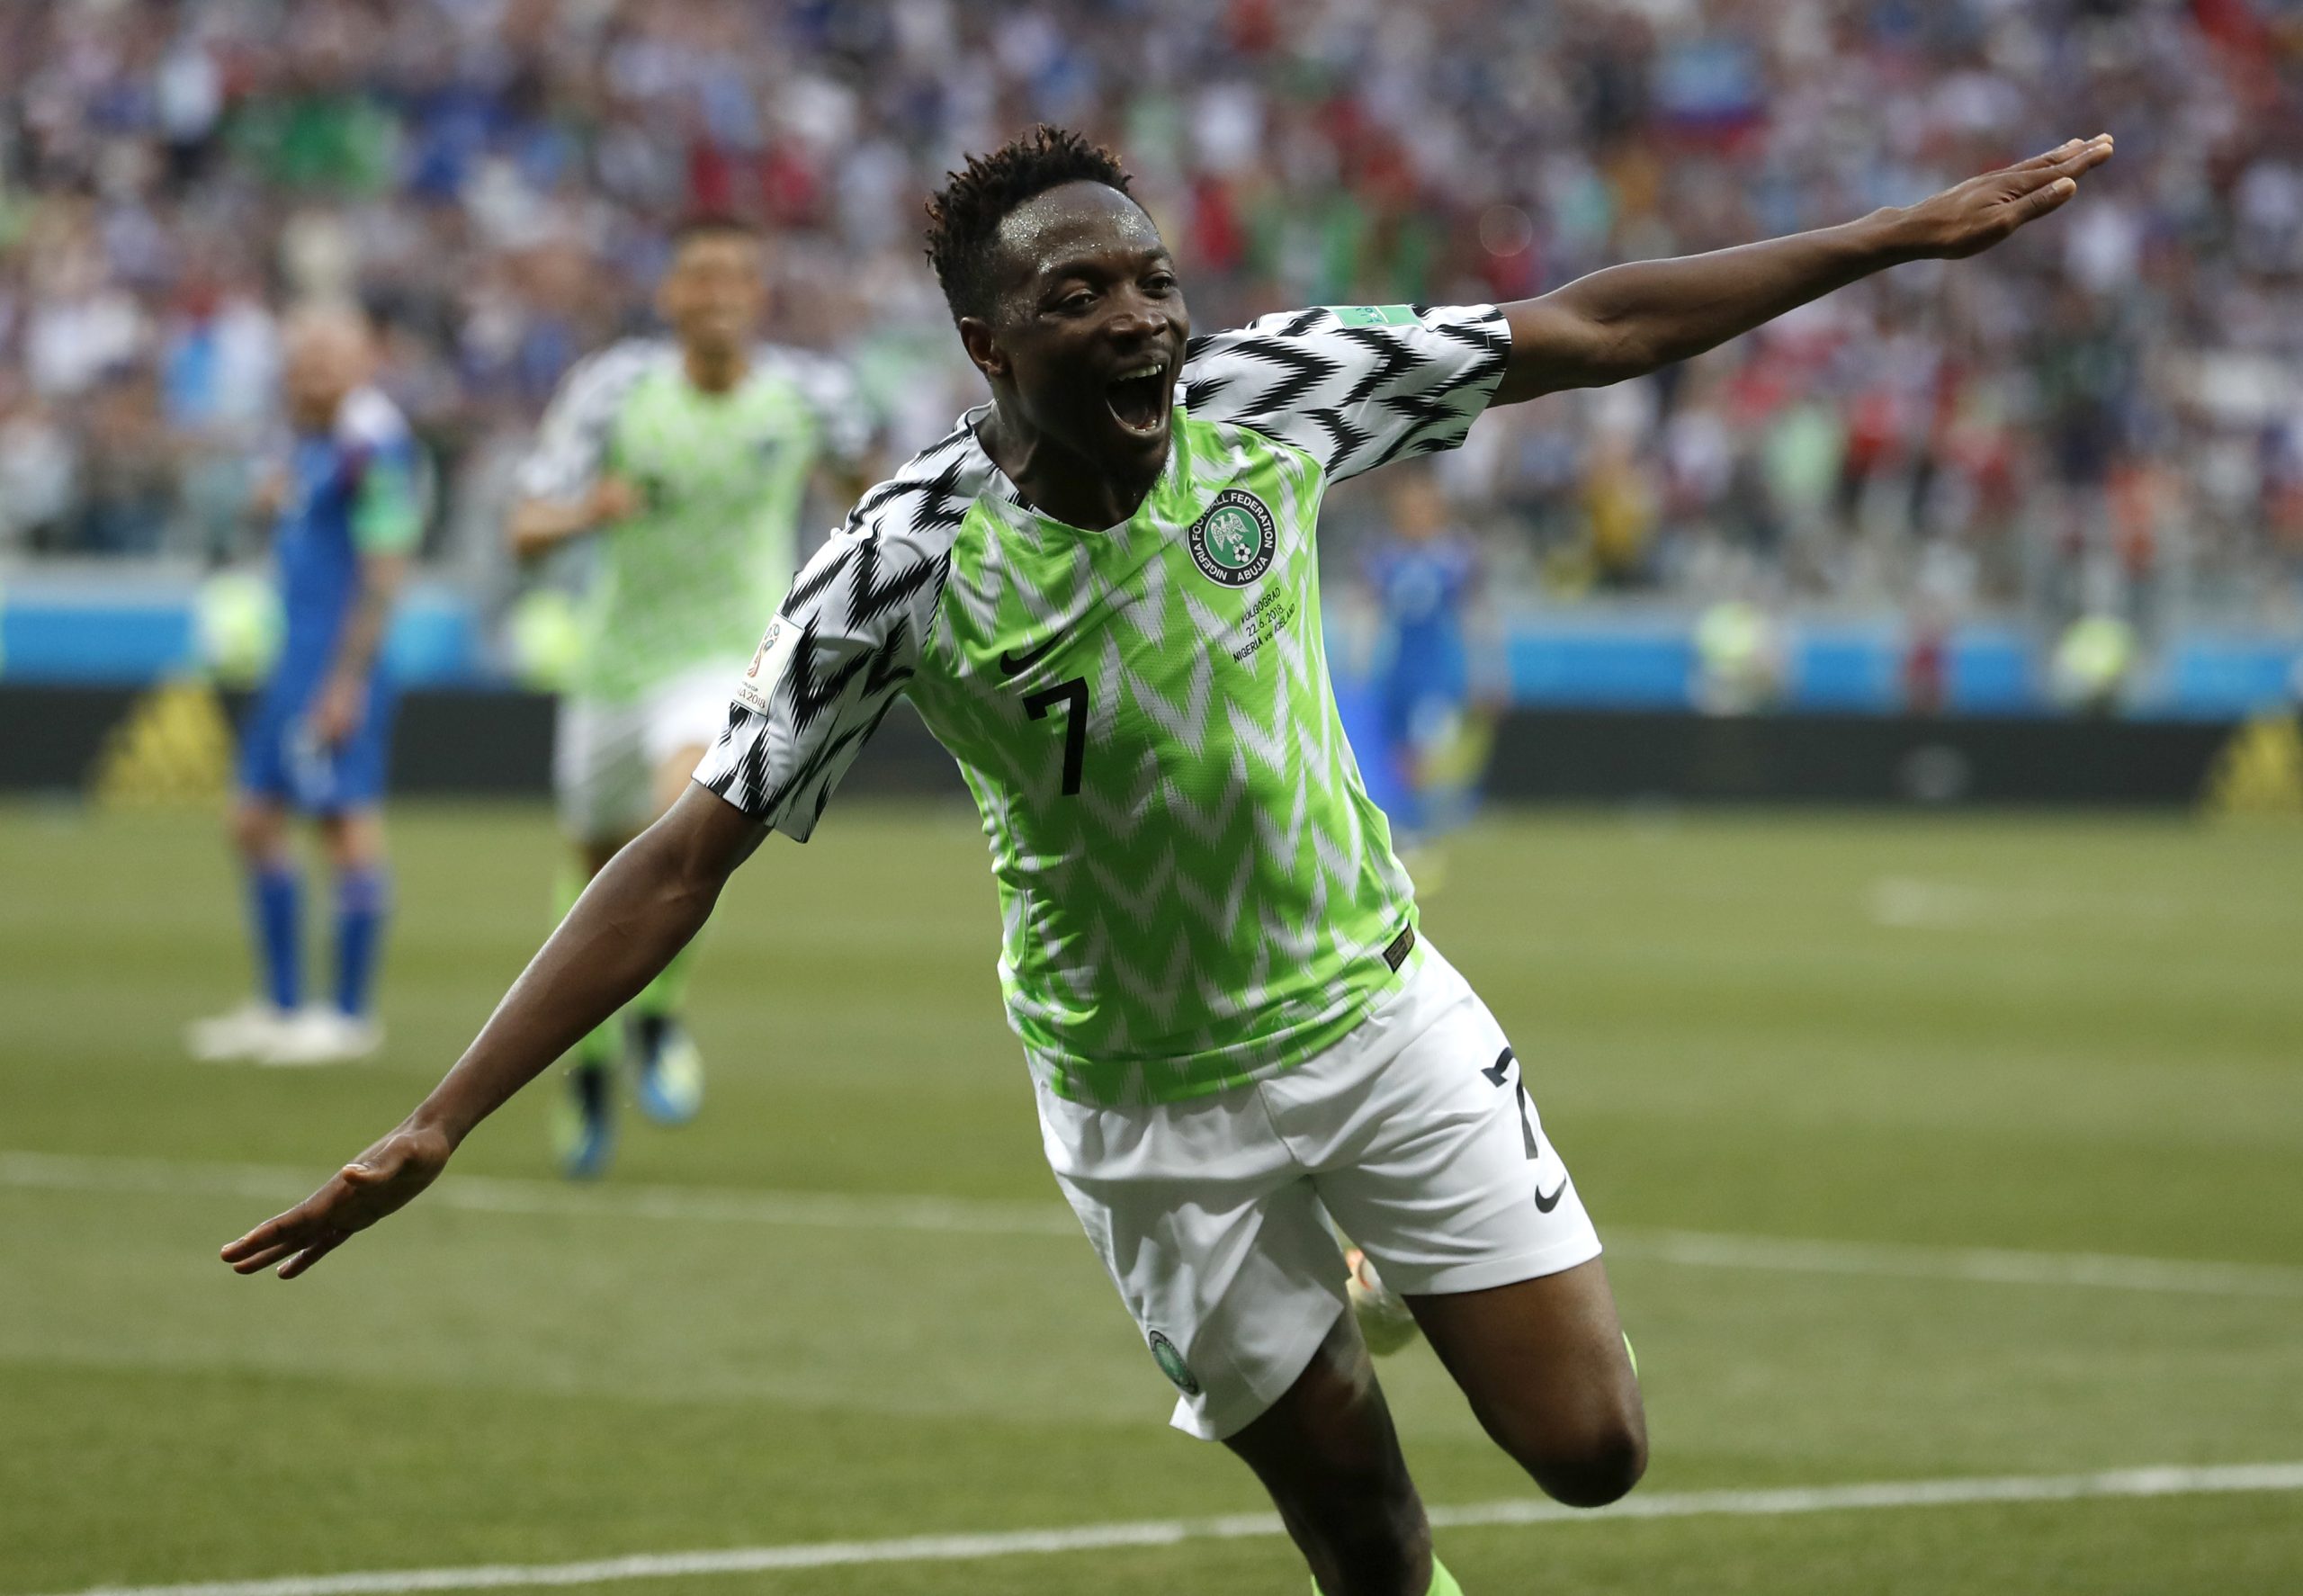 FILE - Nigeria's and former Leicester player Ahmed Musa celebrates after scoring his team's second goal during the group D match between Nigeria and Iceland at the 2018 soccer World Cup in the Volgograd Arena in Volgograd, Russia, Friday, June 22, 2018. Cristian Ronaldo’s Saudi Arabian club Al Nassr will have its FIFA ban on registering new players lifted when it settles a debt with Leicester. (AP Photo/Darko Vojinovic, File)